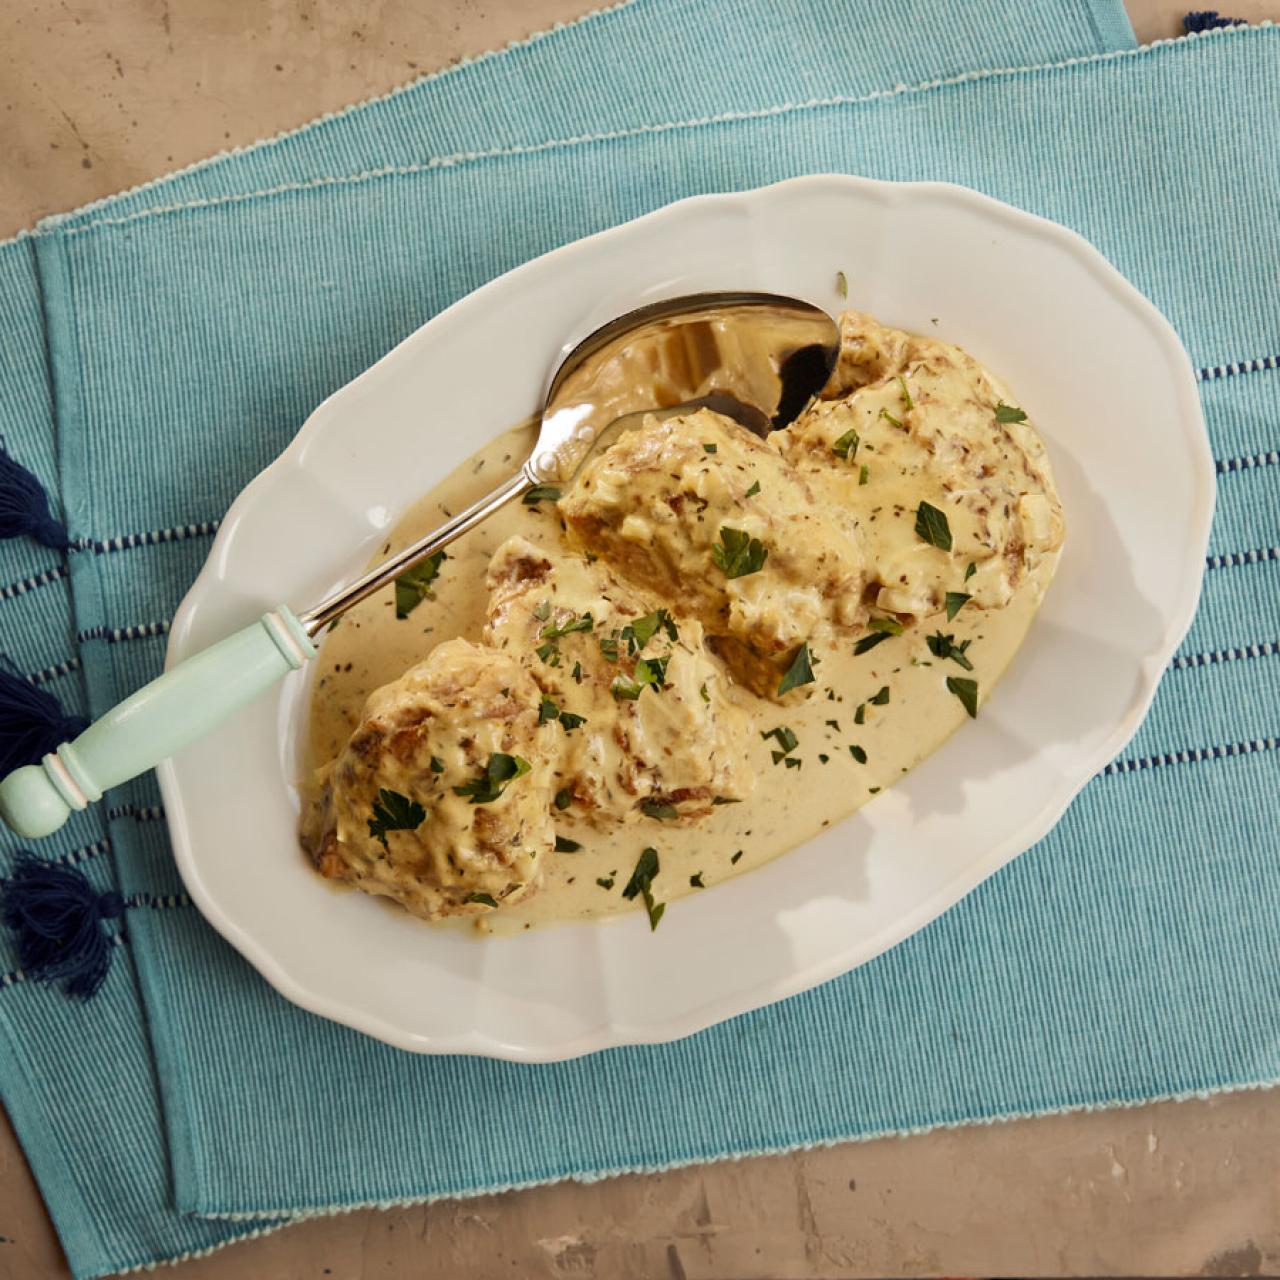 Sunny's Easy Smothered Chicken Recipe, Sunny Anderson